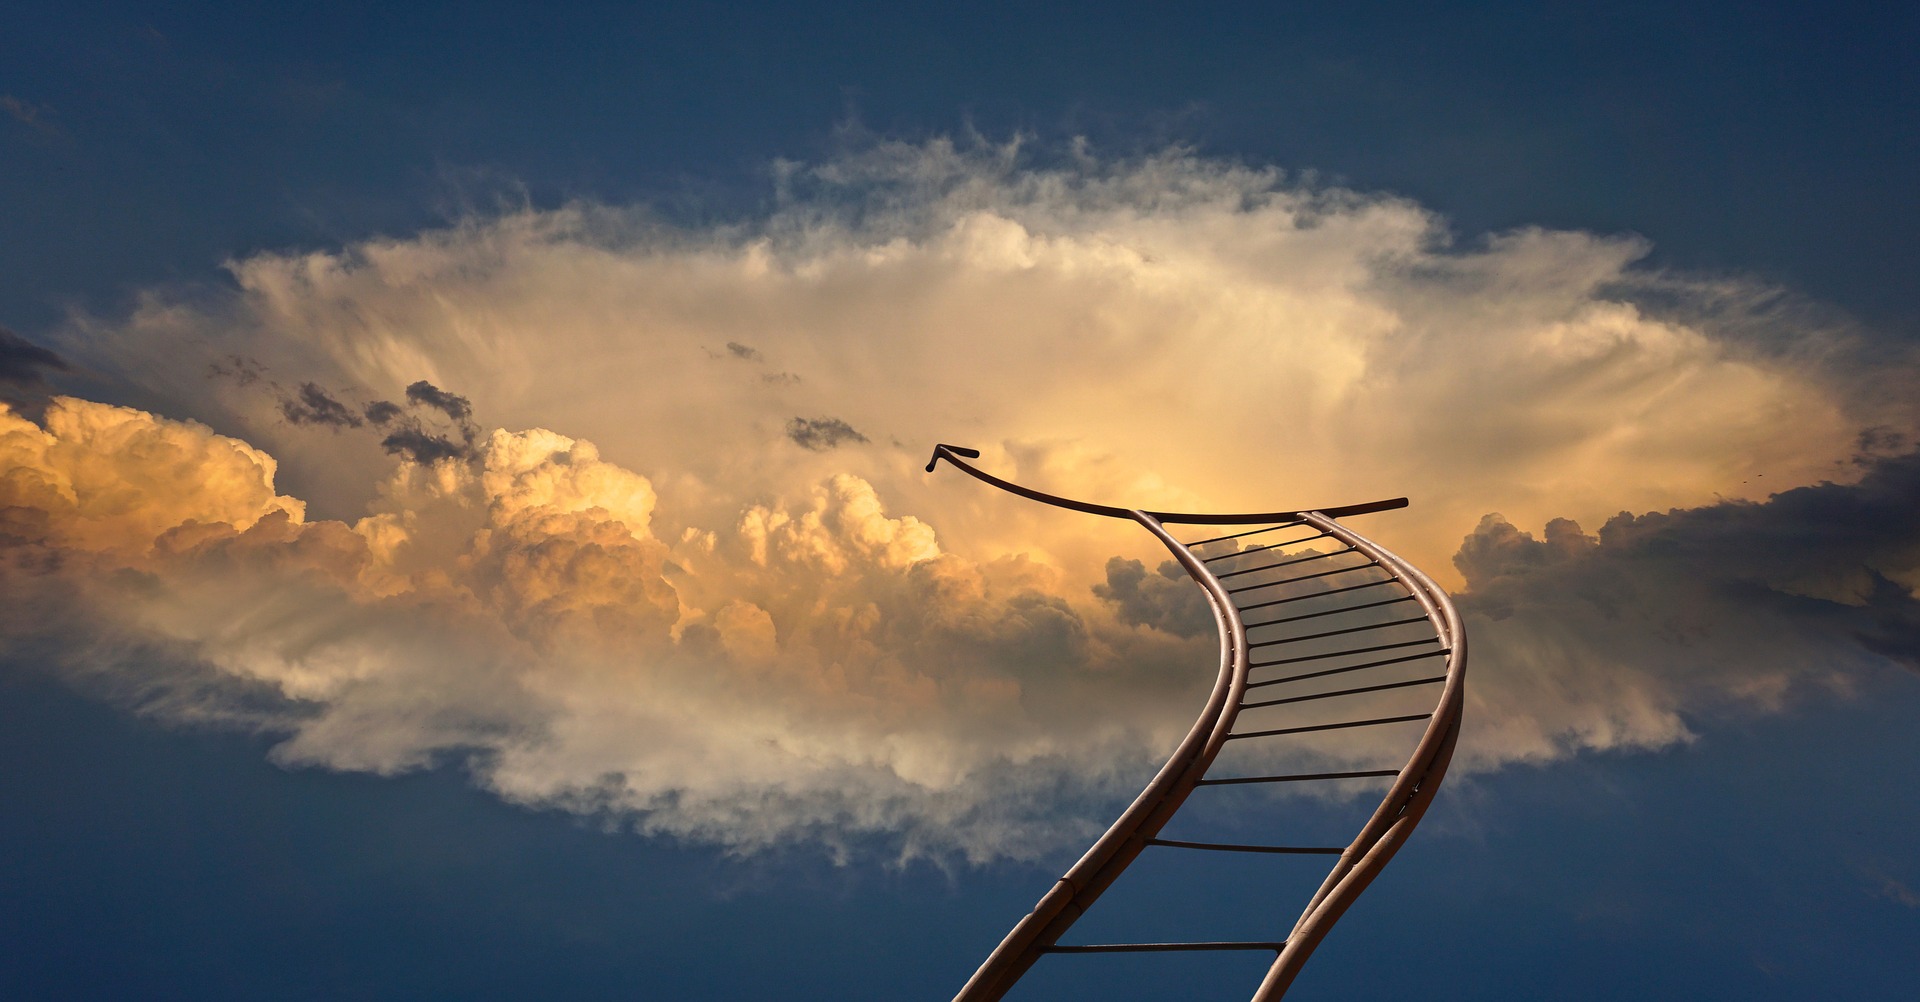 ladder reaching into the clouds